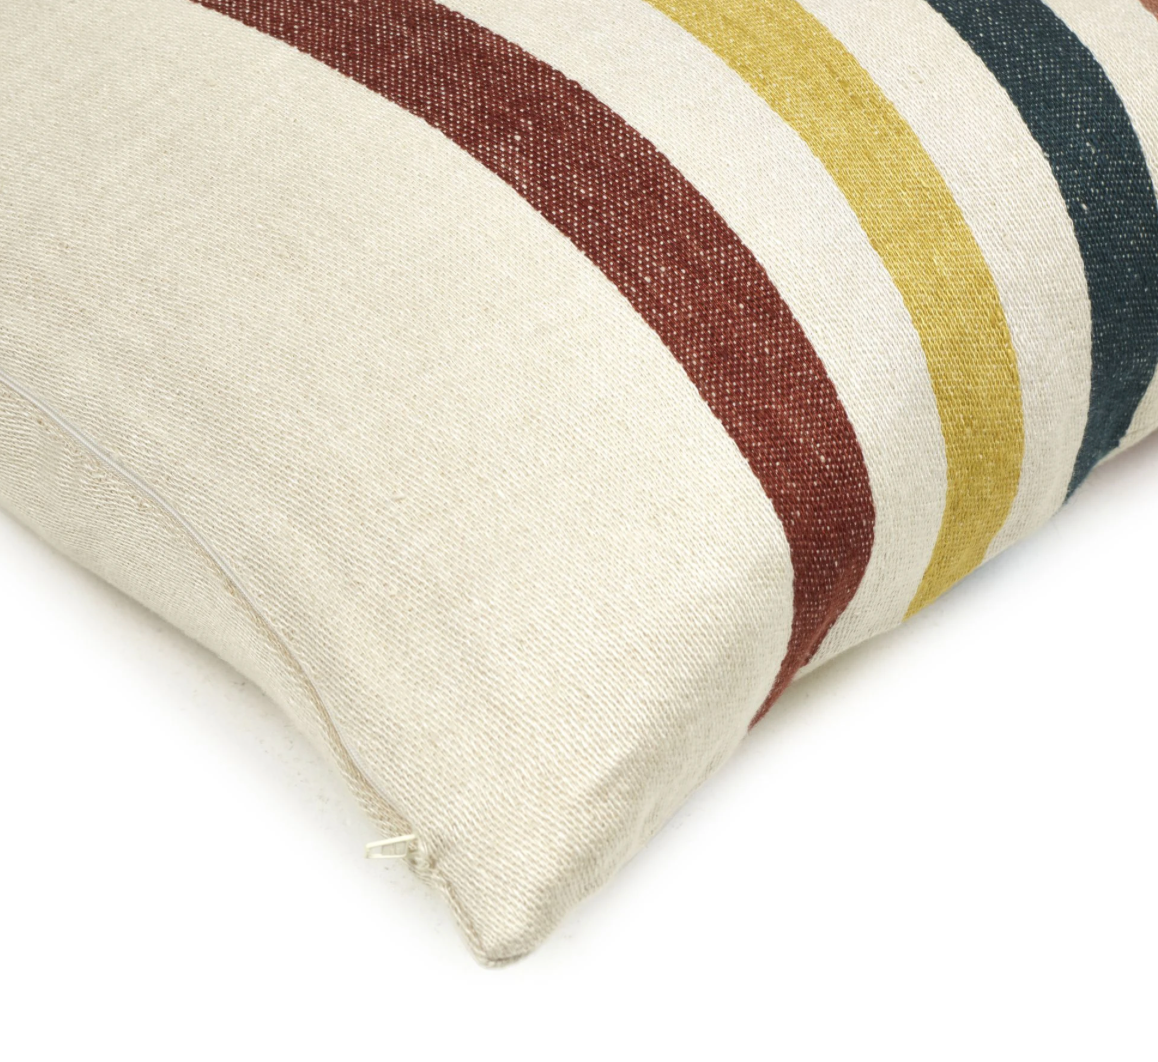 Lake Stripe pillow cover by Libeco